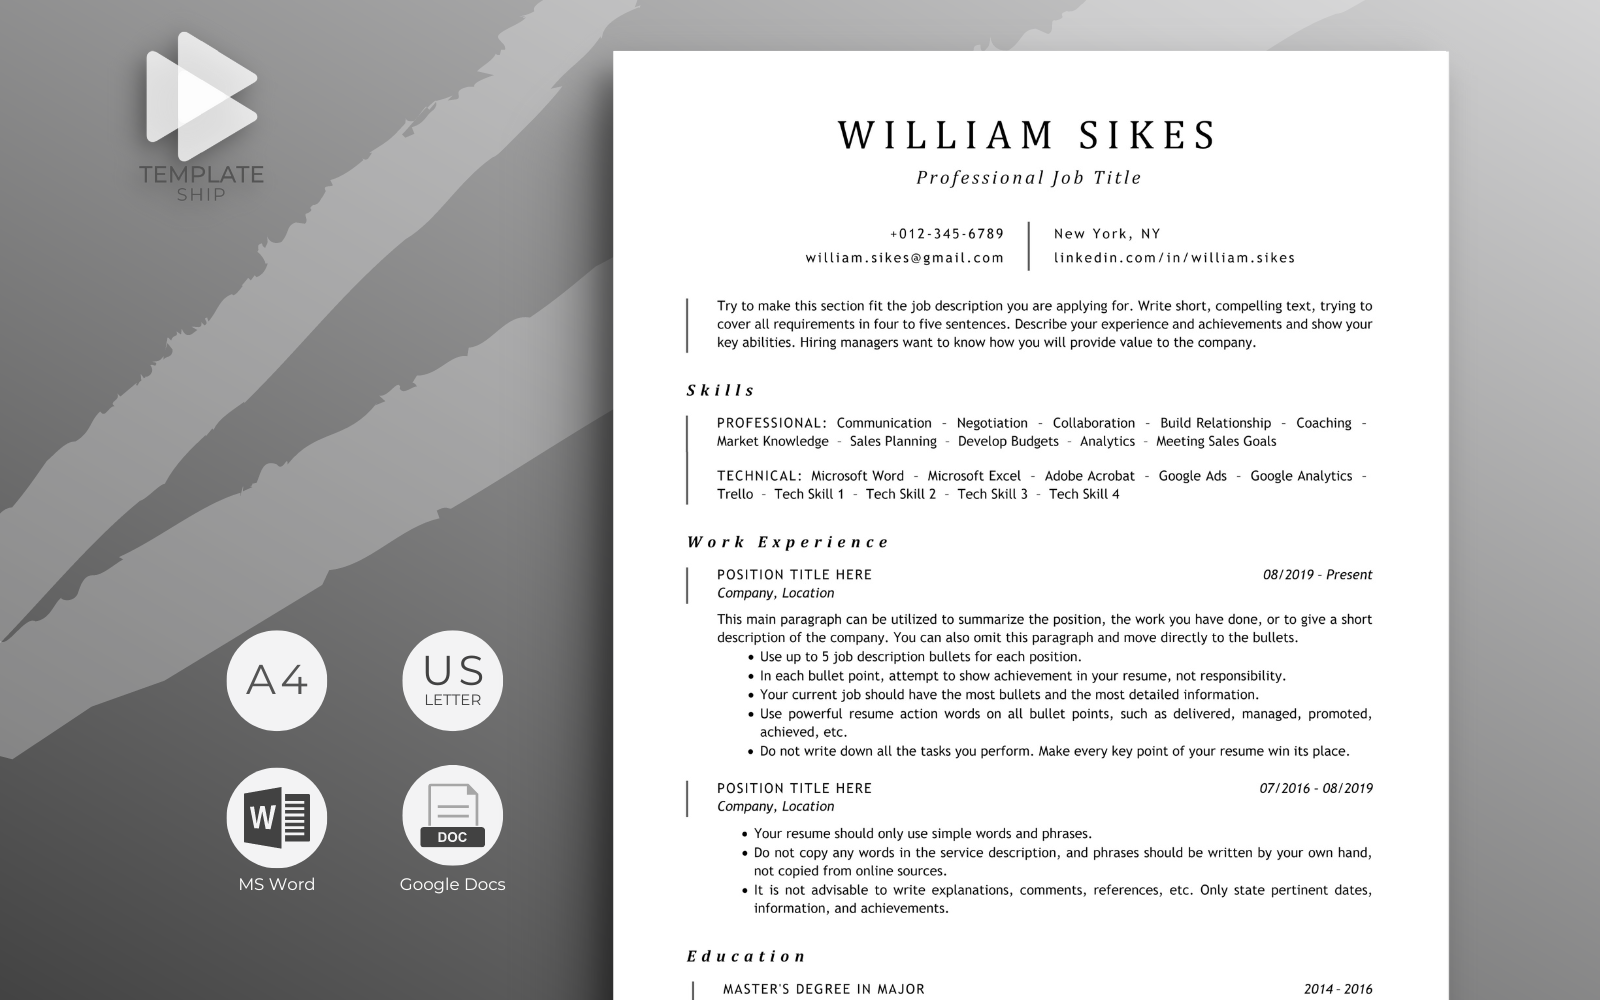 Professional Resume Template William Sikes